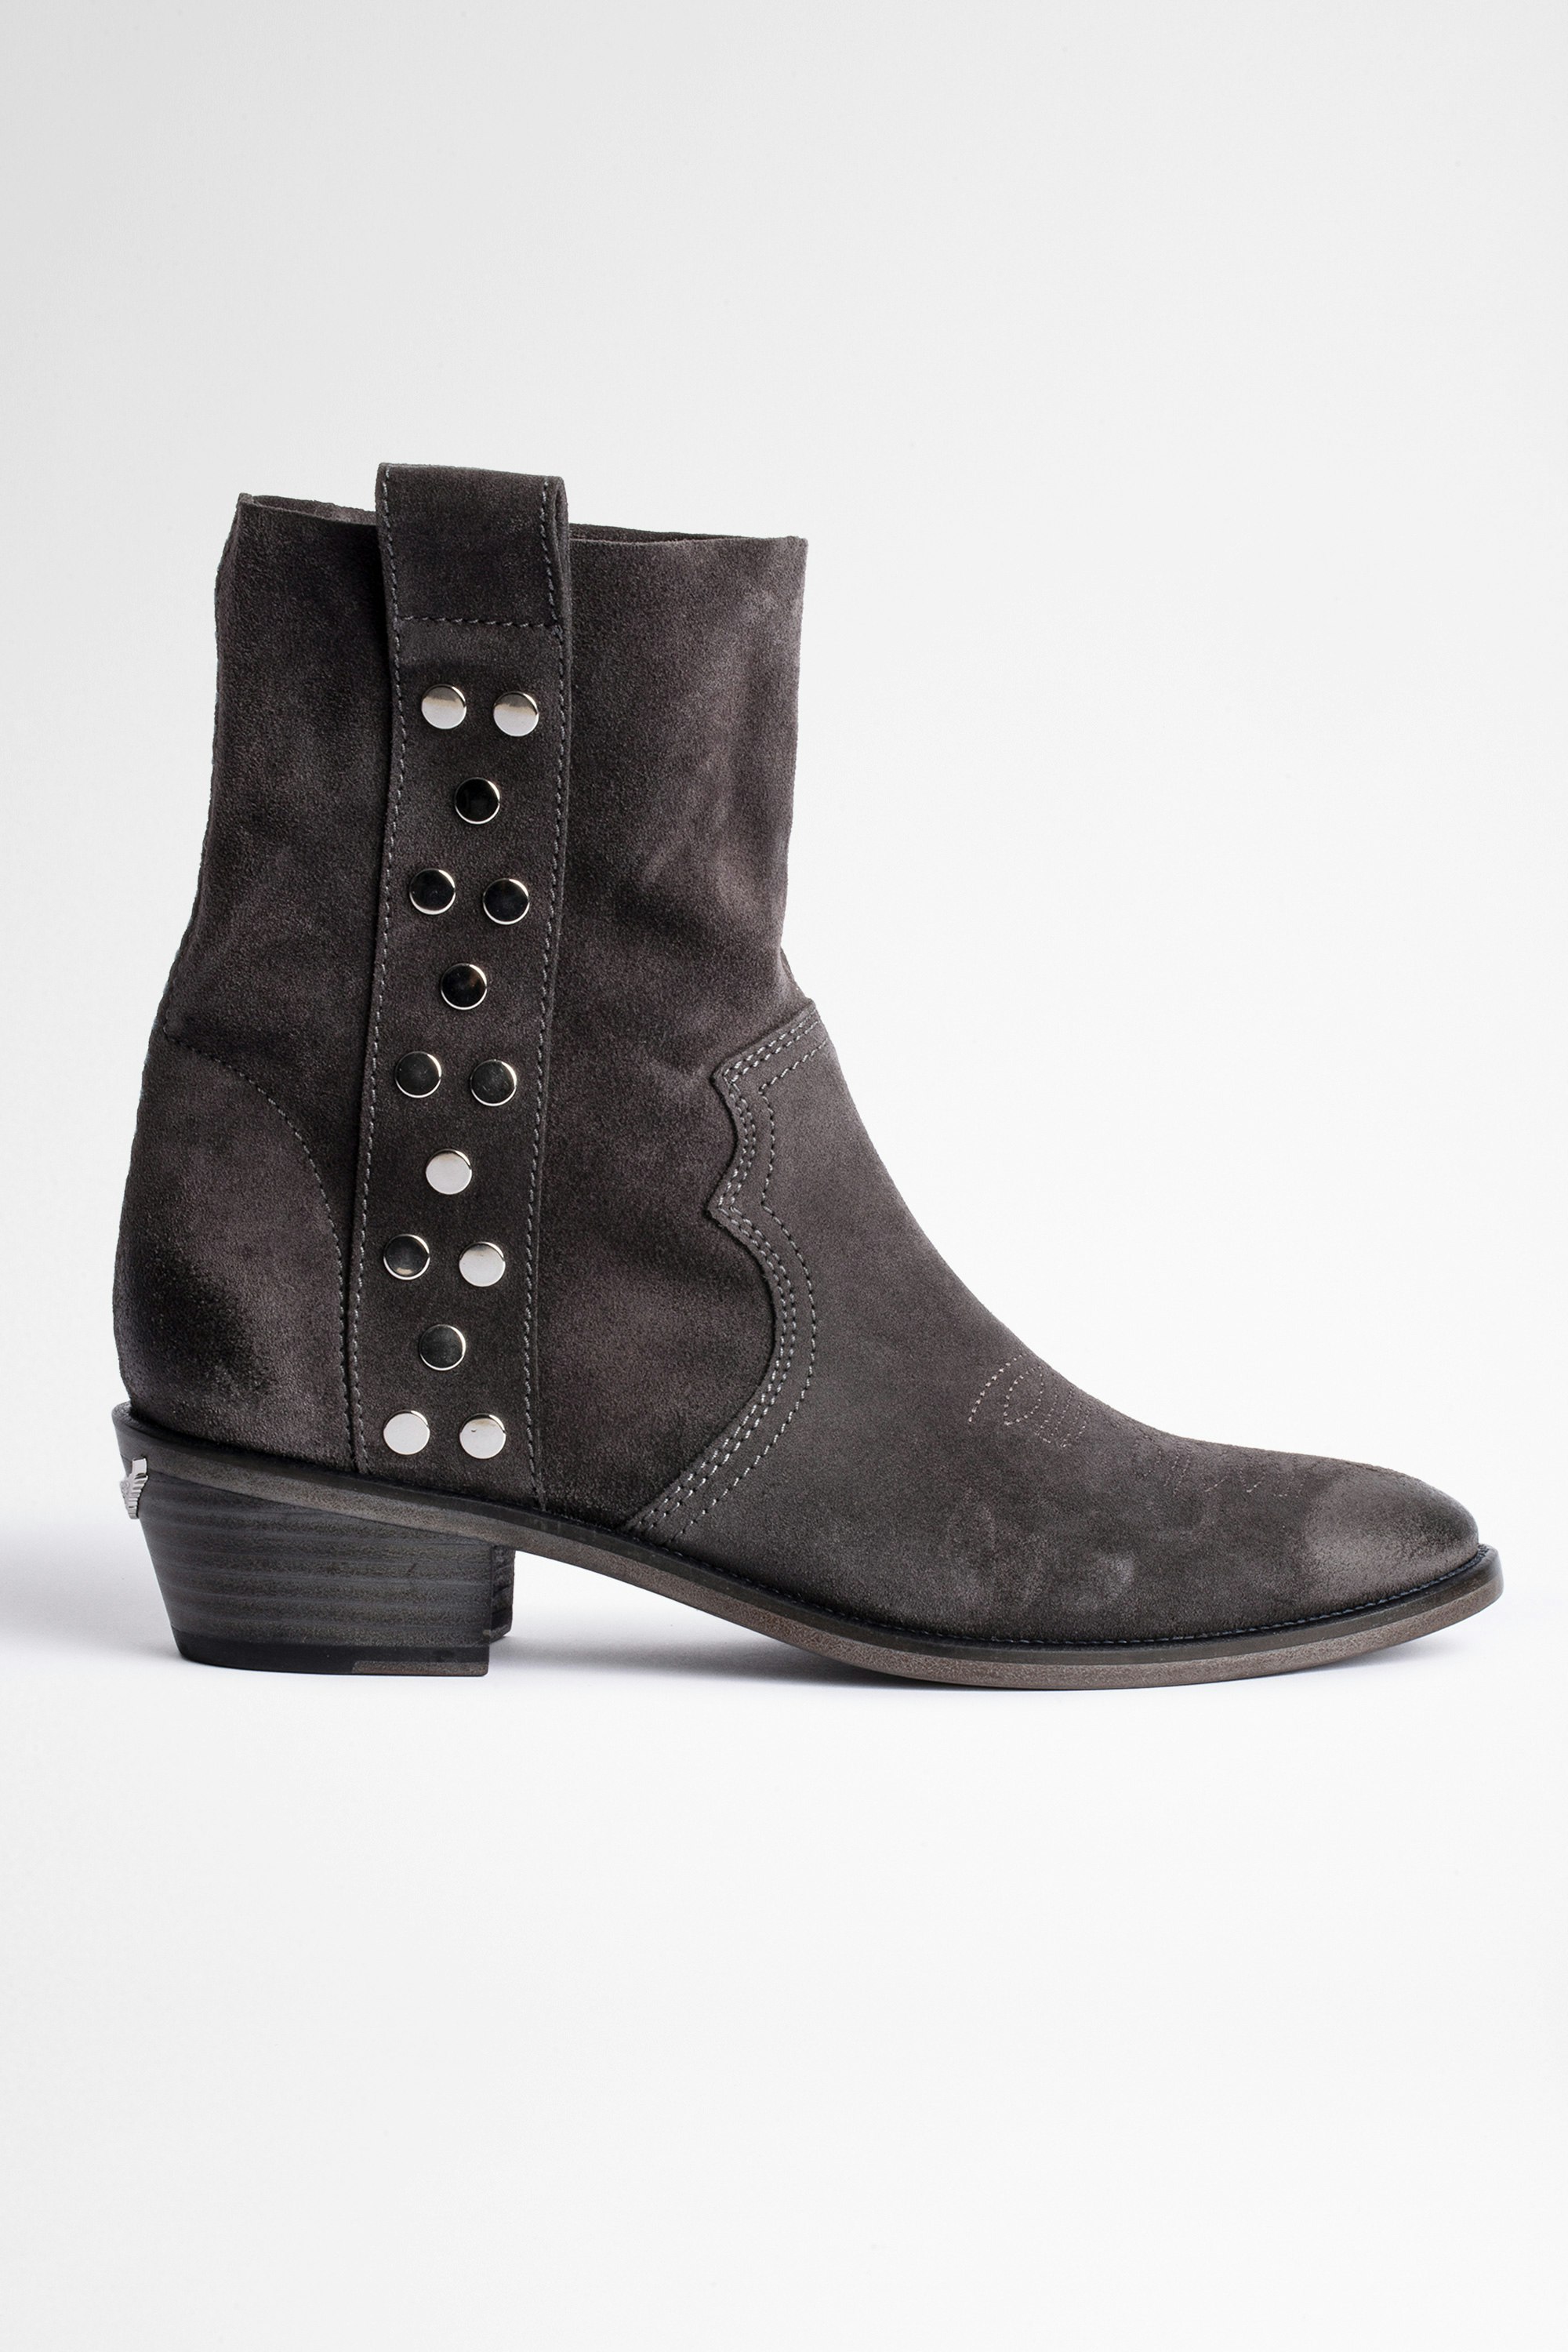 Pilar High Suede Ankle Boots Leather Women's dark grey suede boots with silver studs